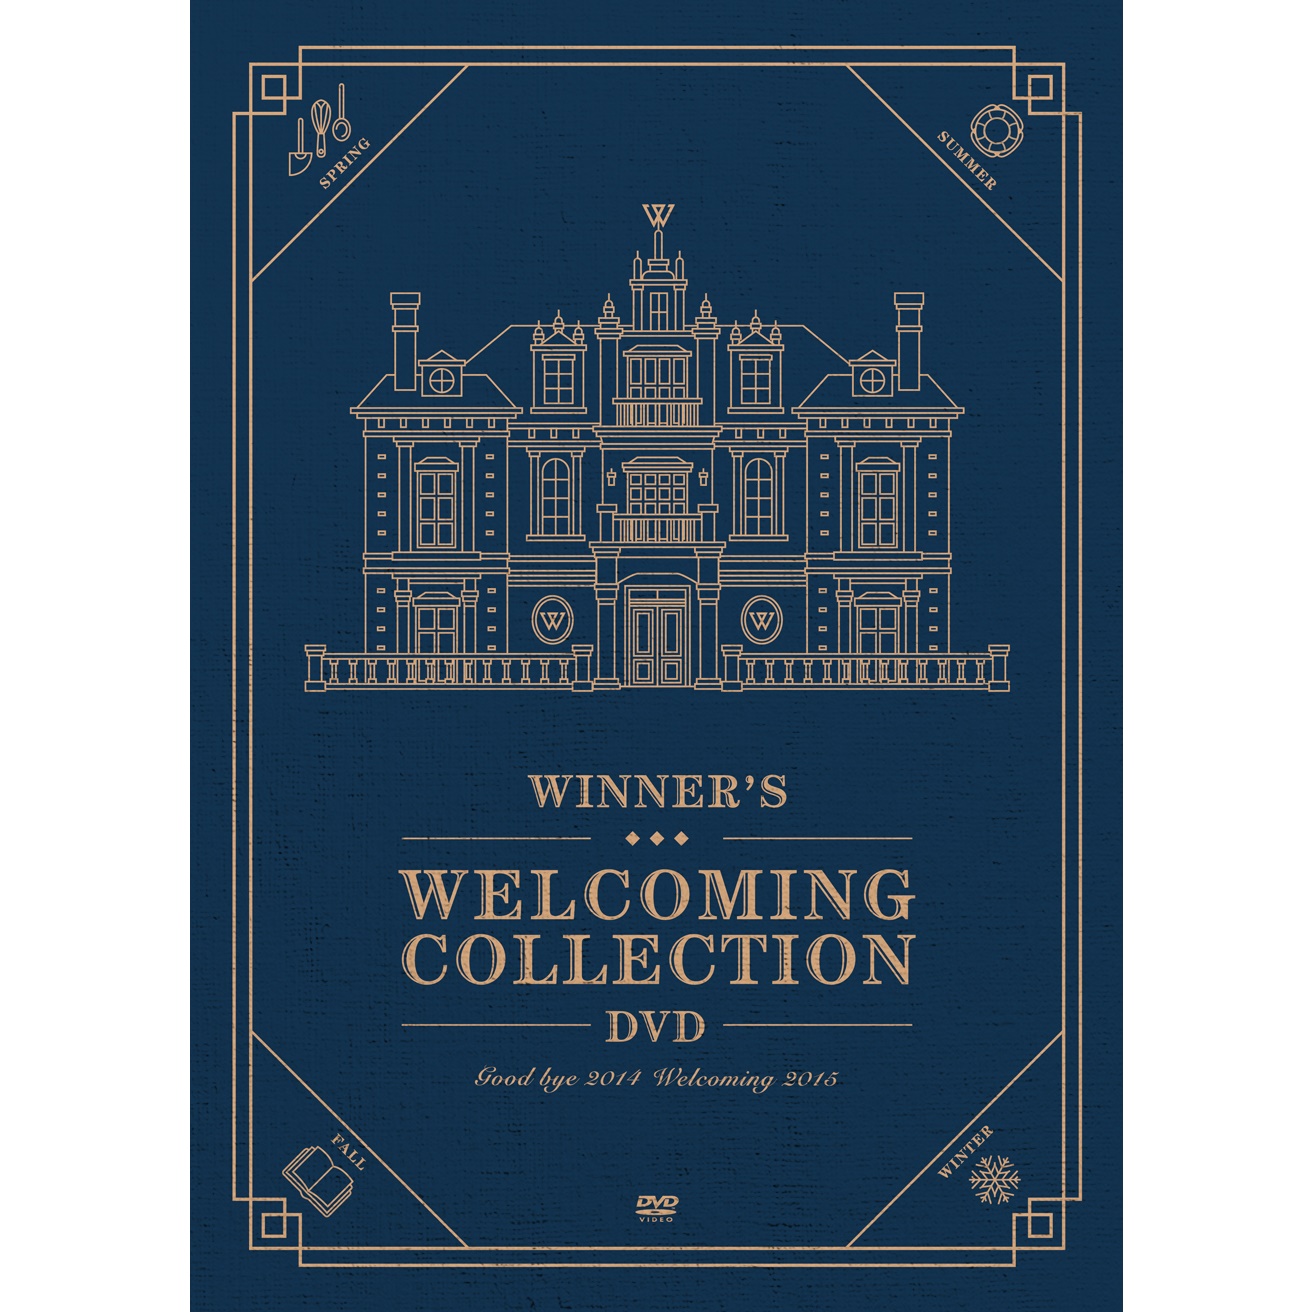 WINNERS WELCOMING COLLECTION DVD [GOOD BYE 2014 - WELCOMING 2015]